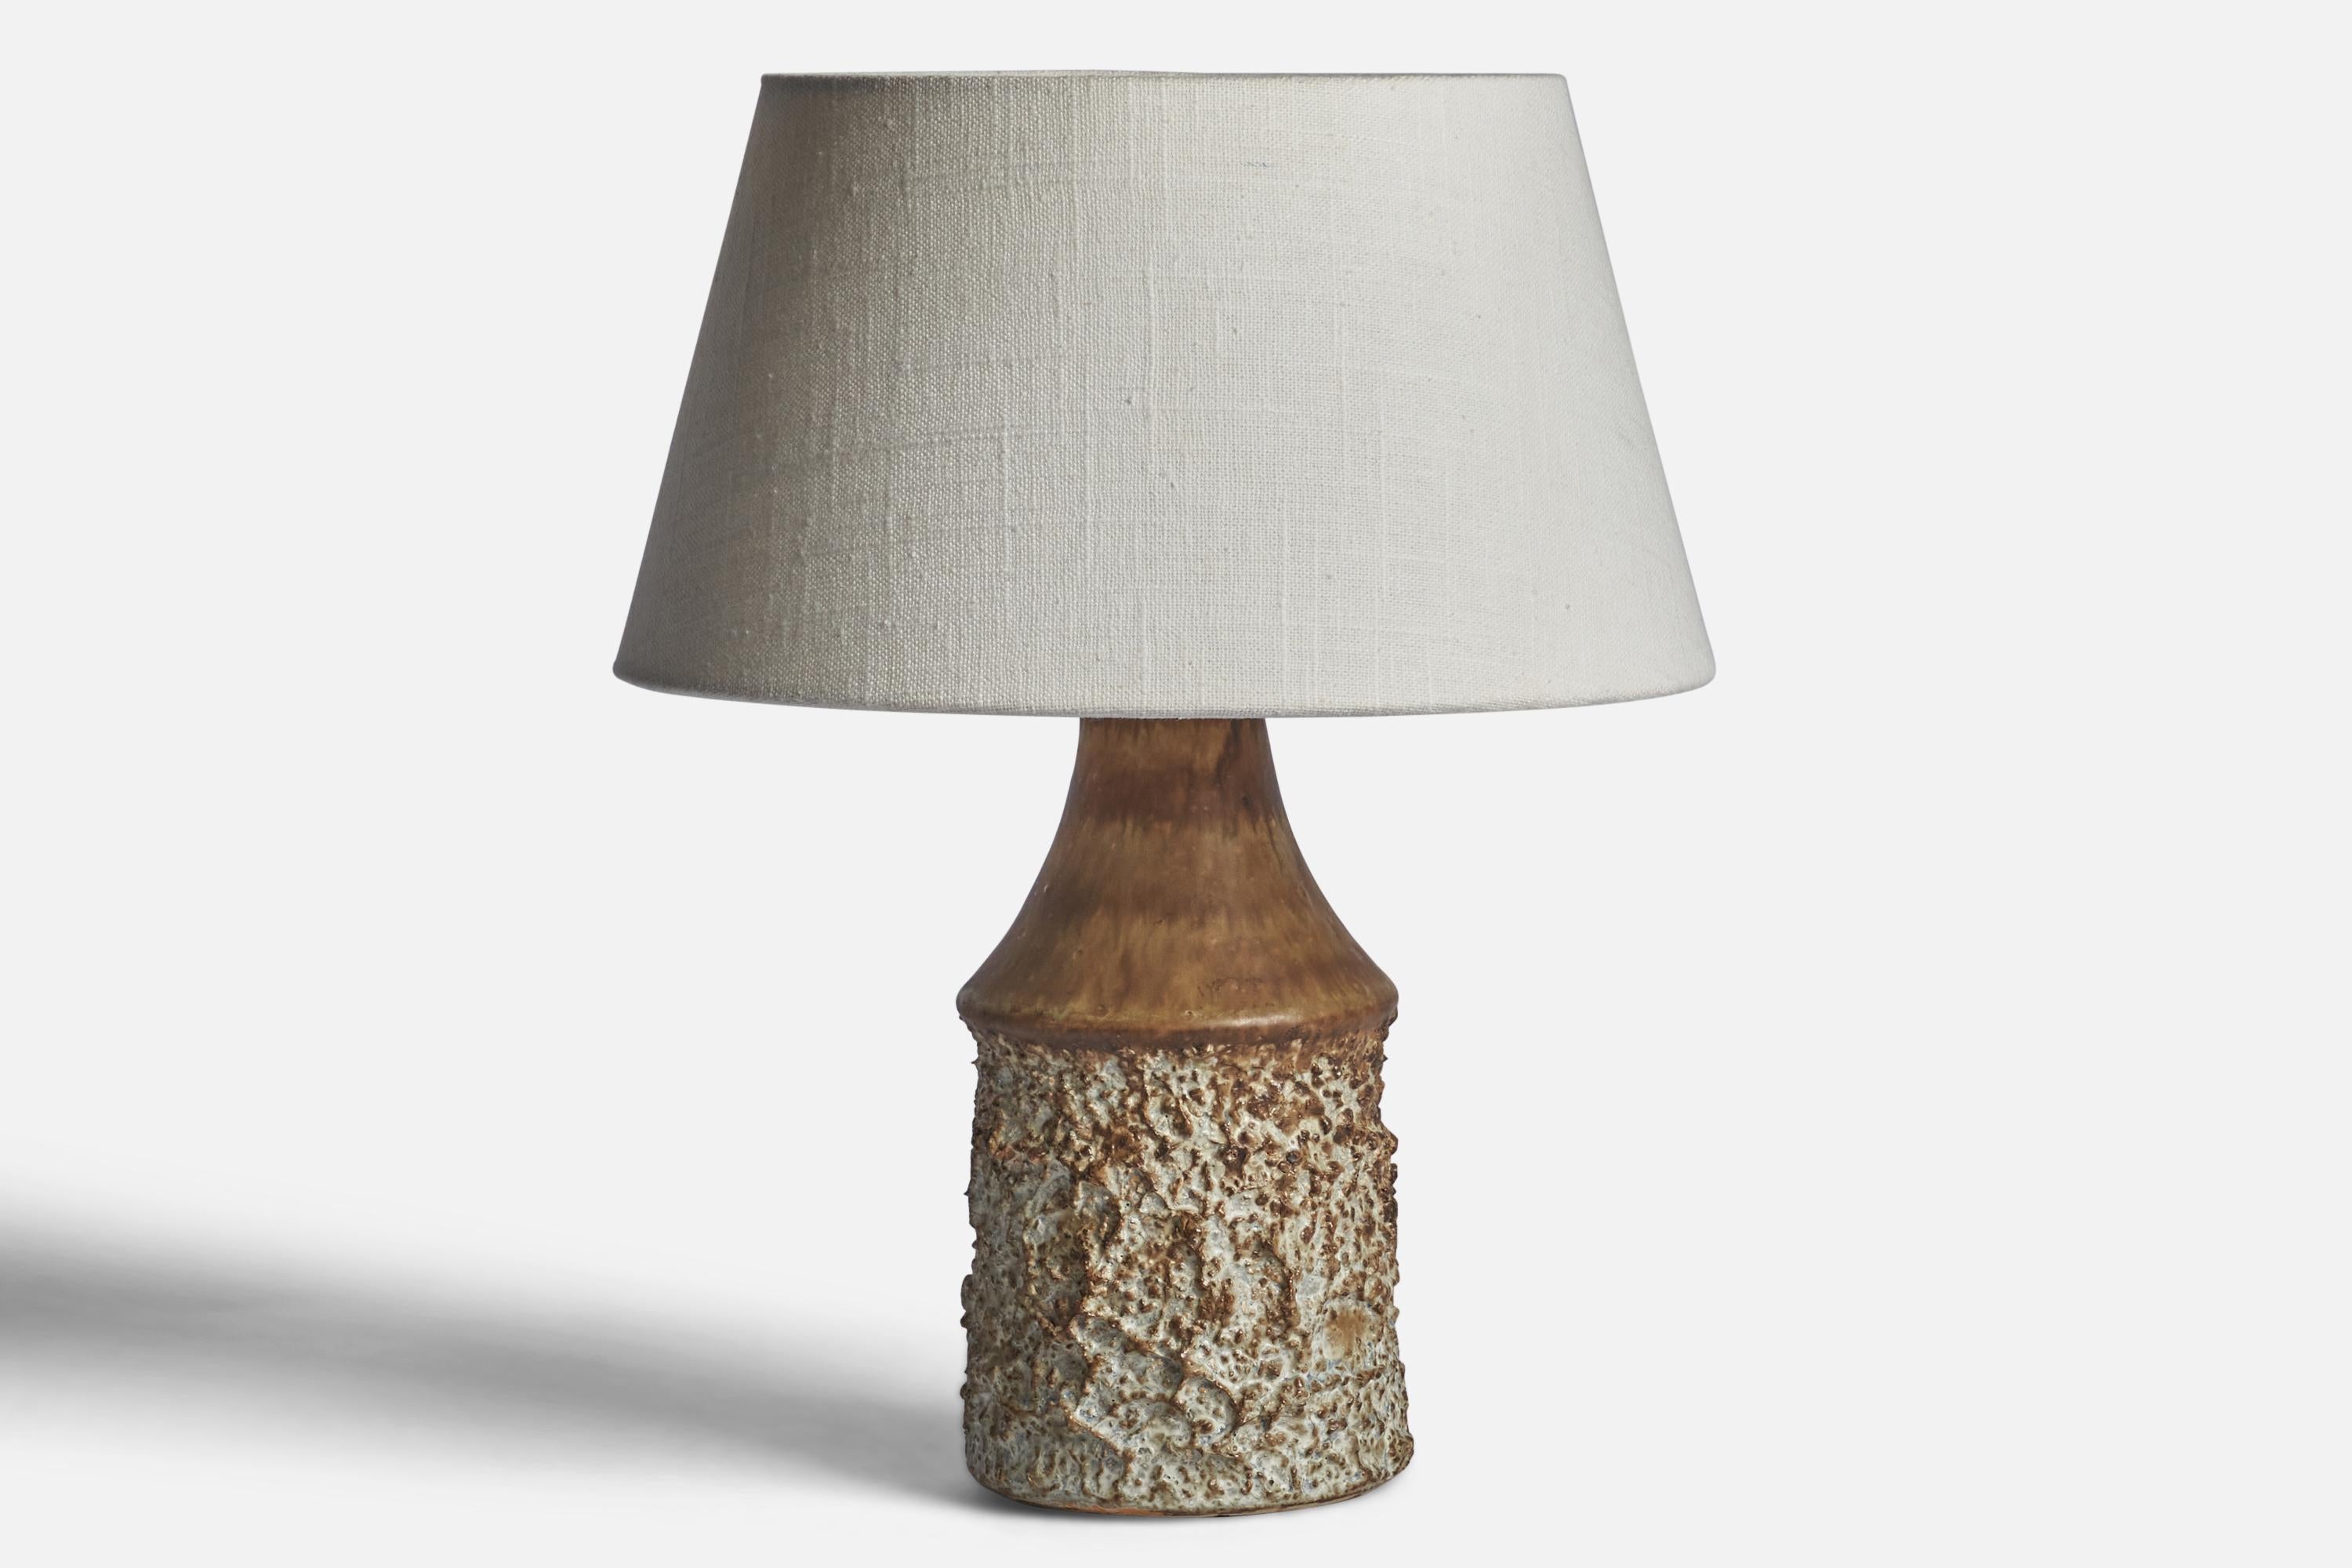 A brown and grey-glazed stoneware table lamp designed by Bruno Karlsson and produced by Ego Stengods, Sweden, 1960s.

Dimensions of Lamp (inches): 9.65” H x 4.25” Diameter
Dimensions of Shade (inches): 7” Top Diameter x 10” Bottom Diameter x